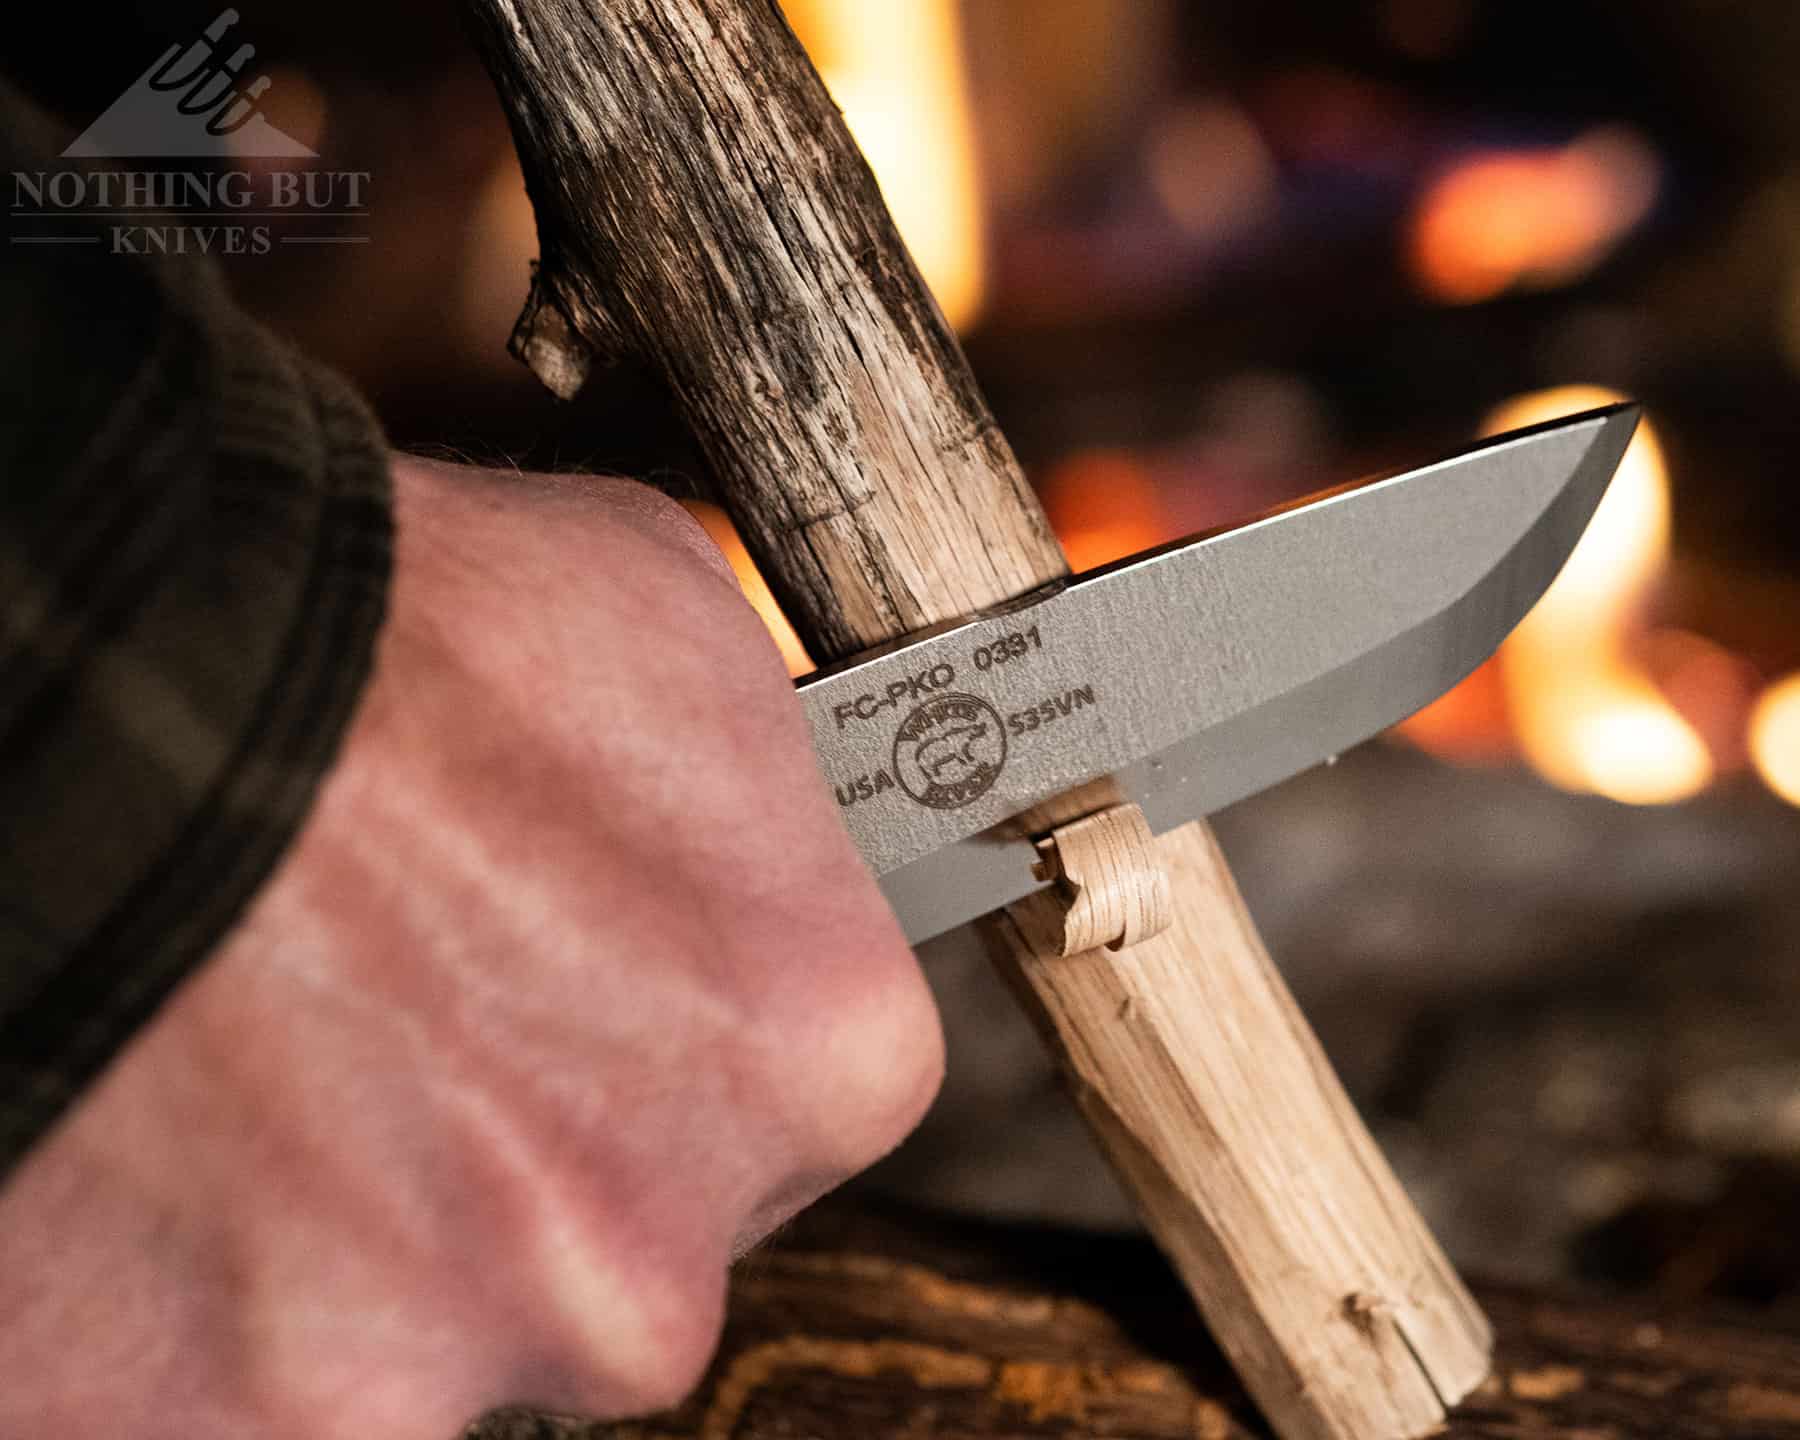 The S35VN blade of the Firecraft Puukko is more than capable. 